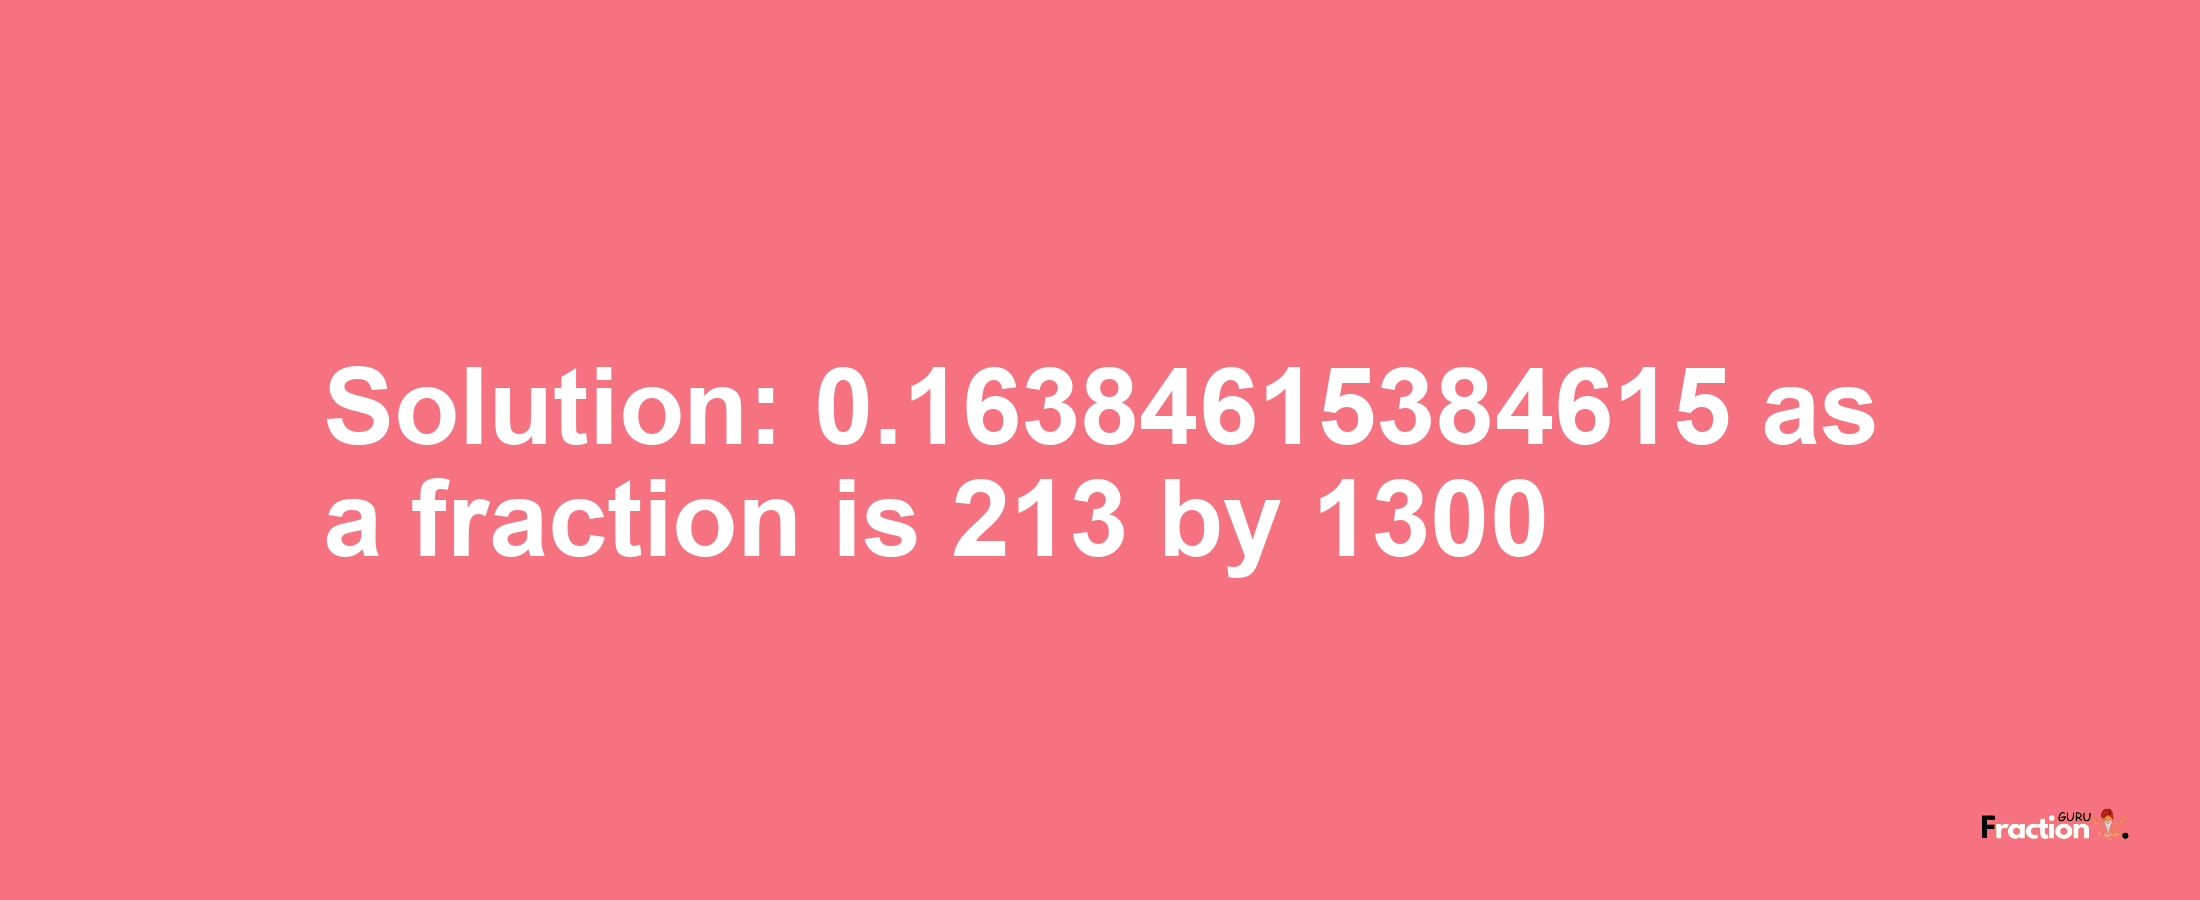 Solution:0.16384615384615 as a fraction is 213/1300